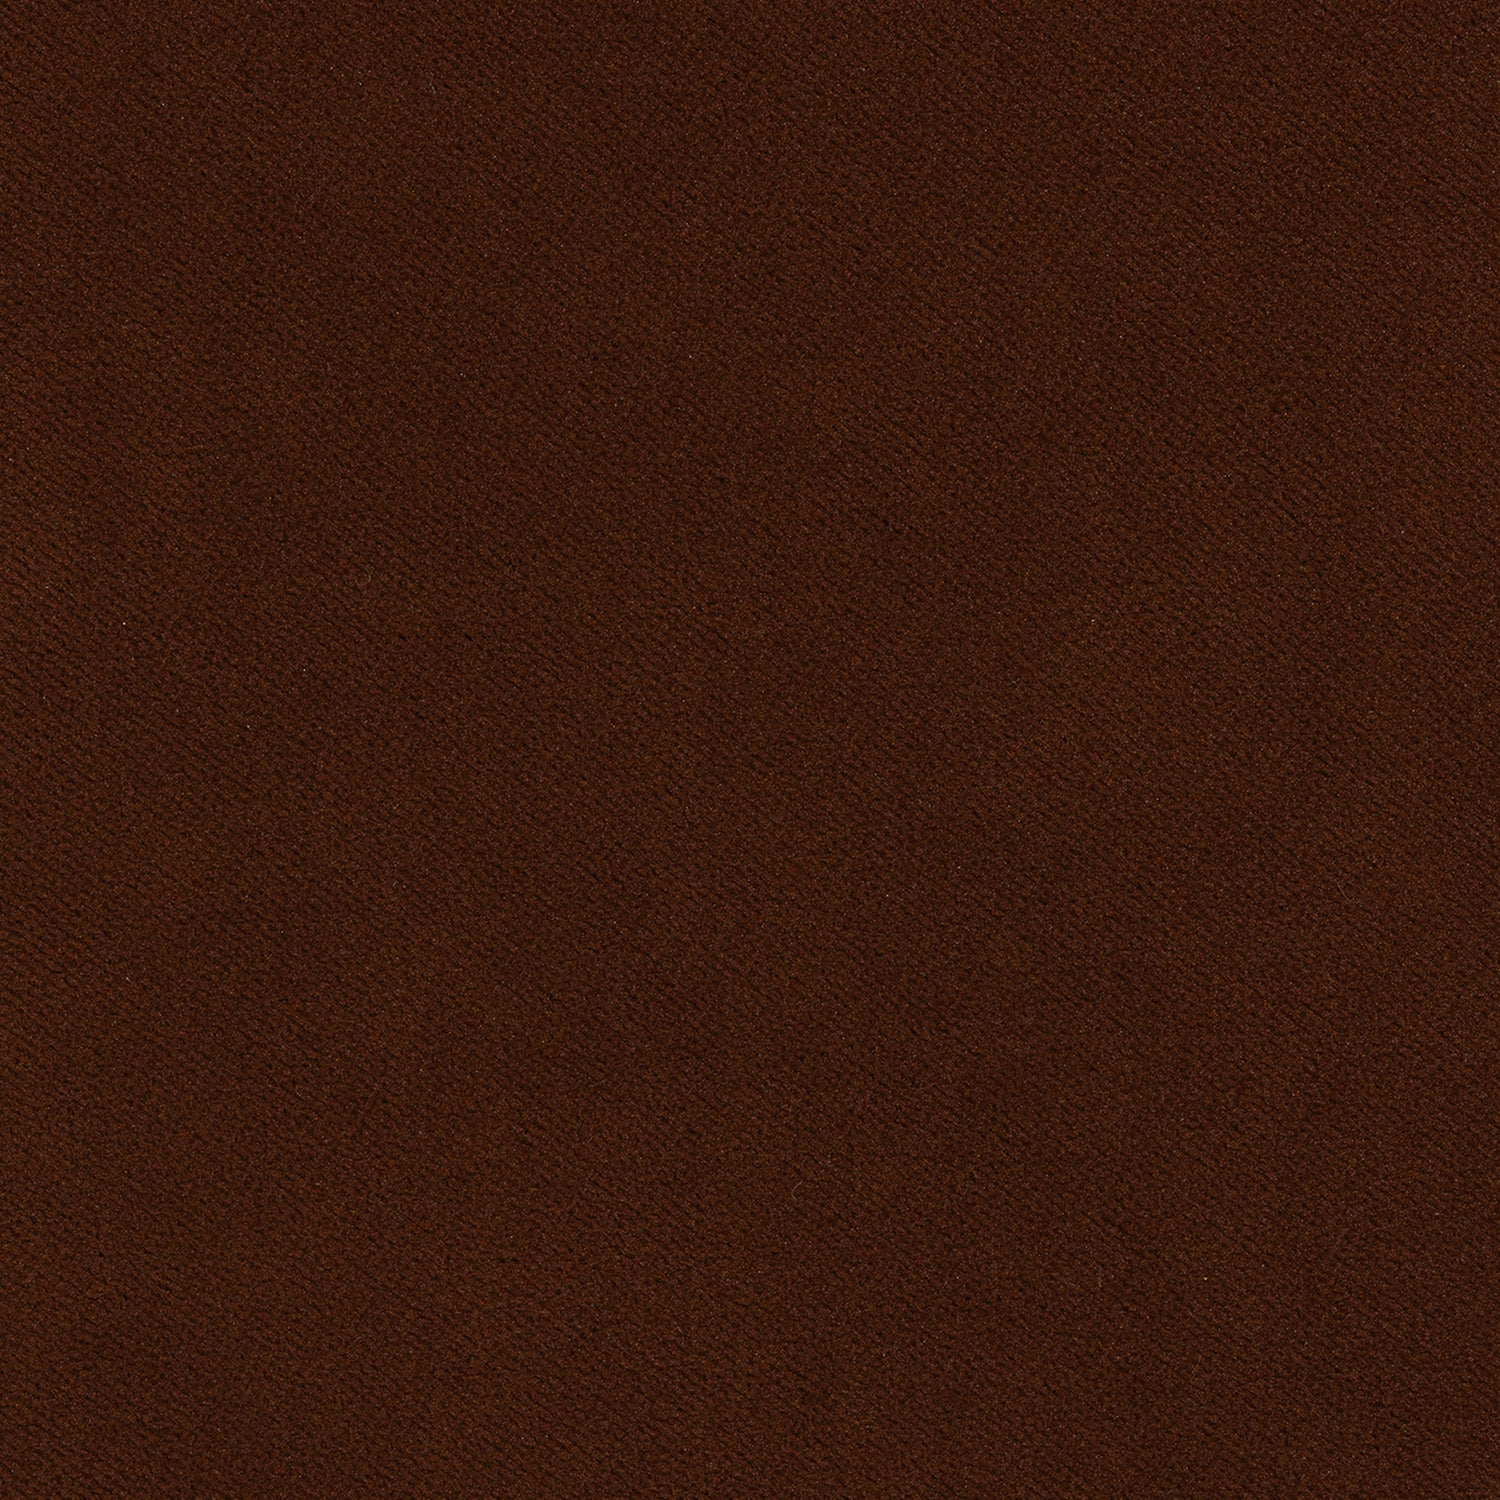 Club Velvet fabric in chocolate color - pattern number W7228 - by Thibaut in the Club Velvet collection